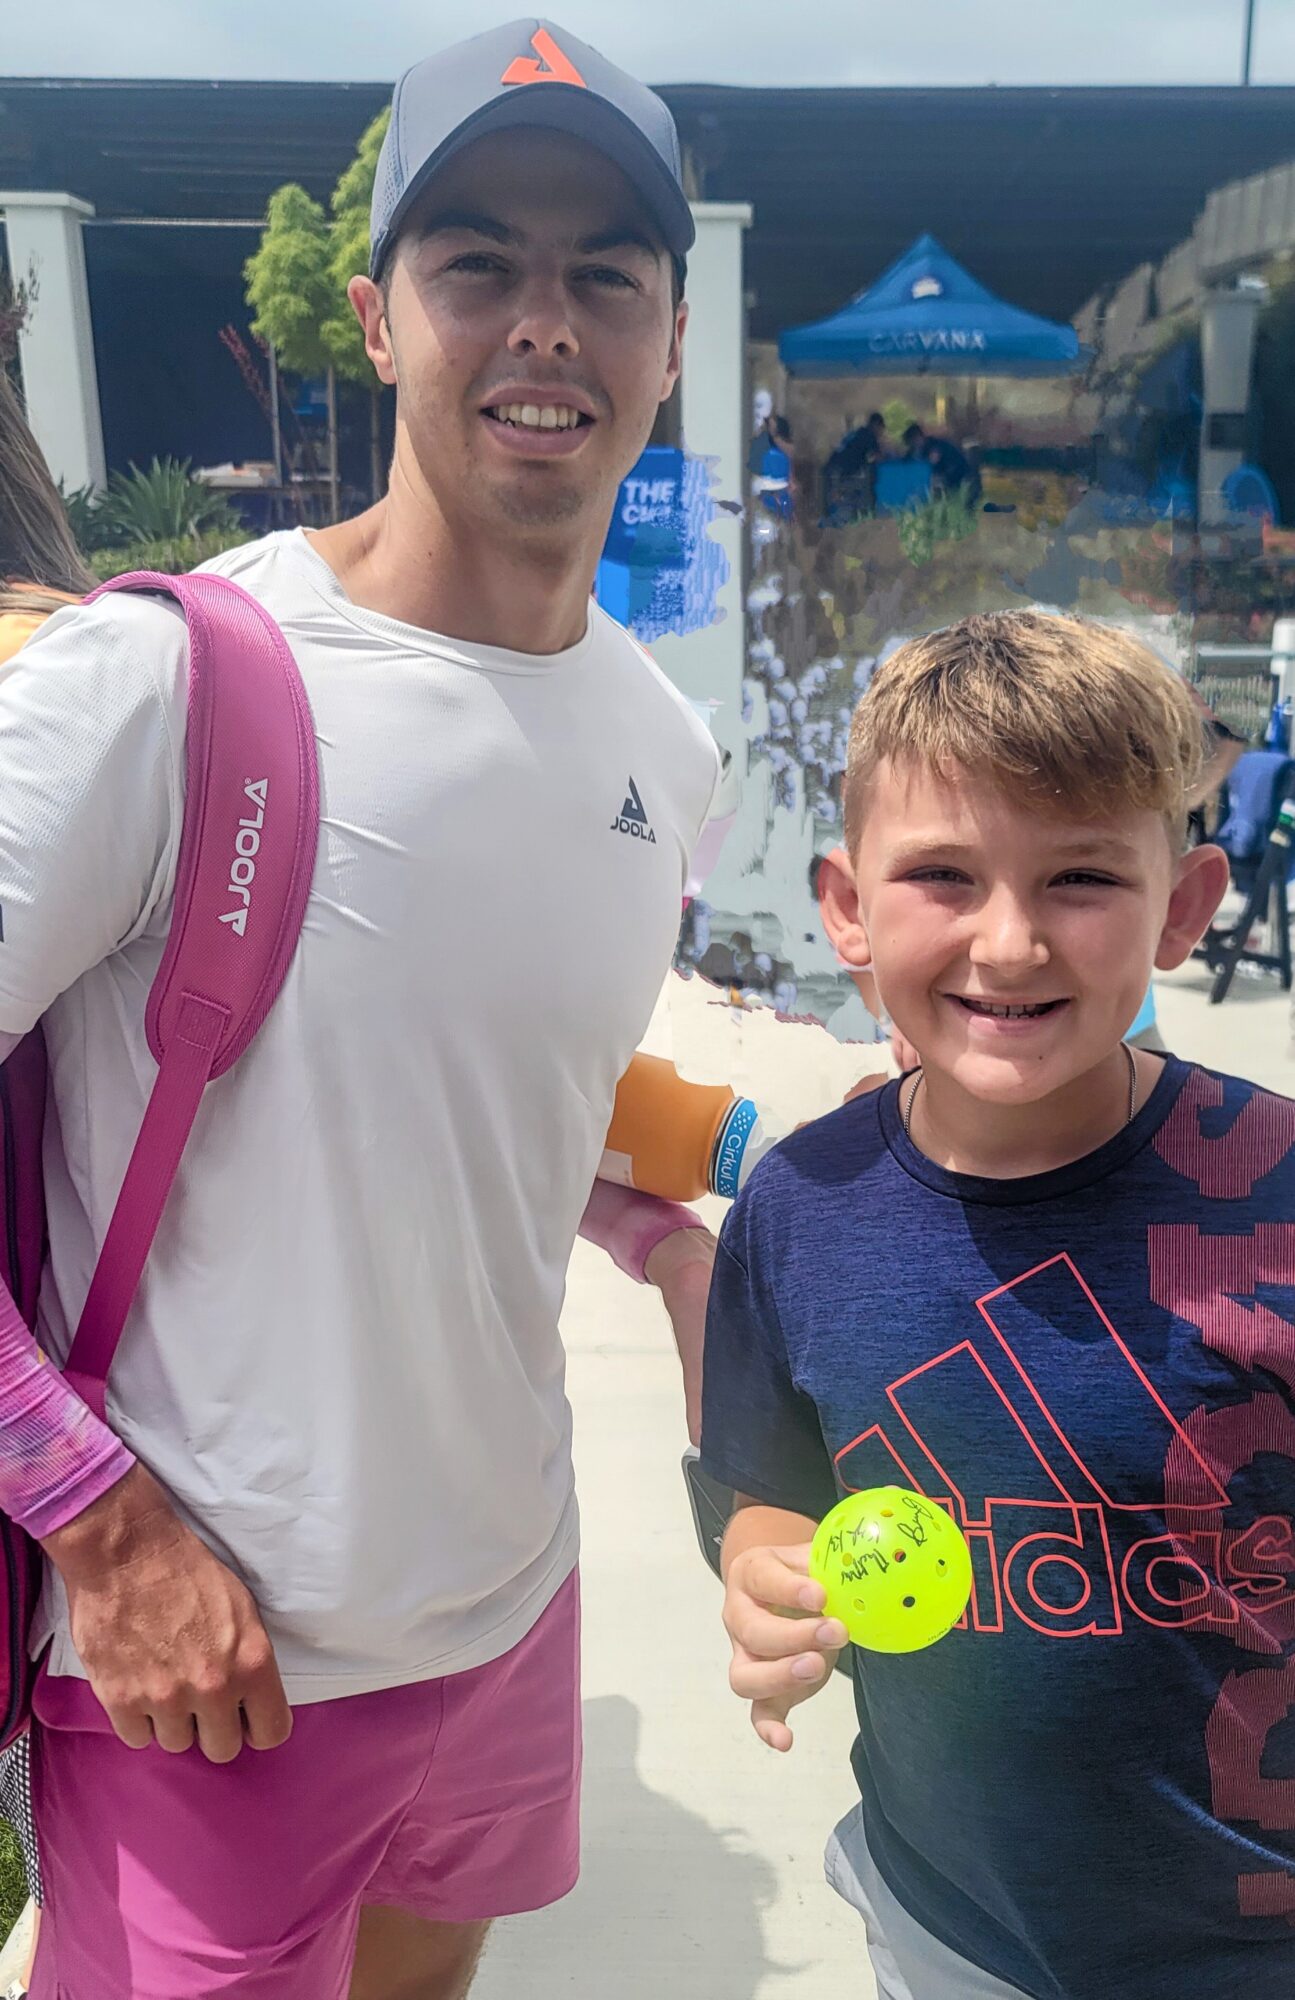 We met the #1 Mens pickleball player in the world, Ben Johns, who signed a ball and took a picture with Jett